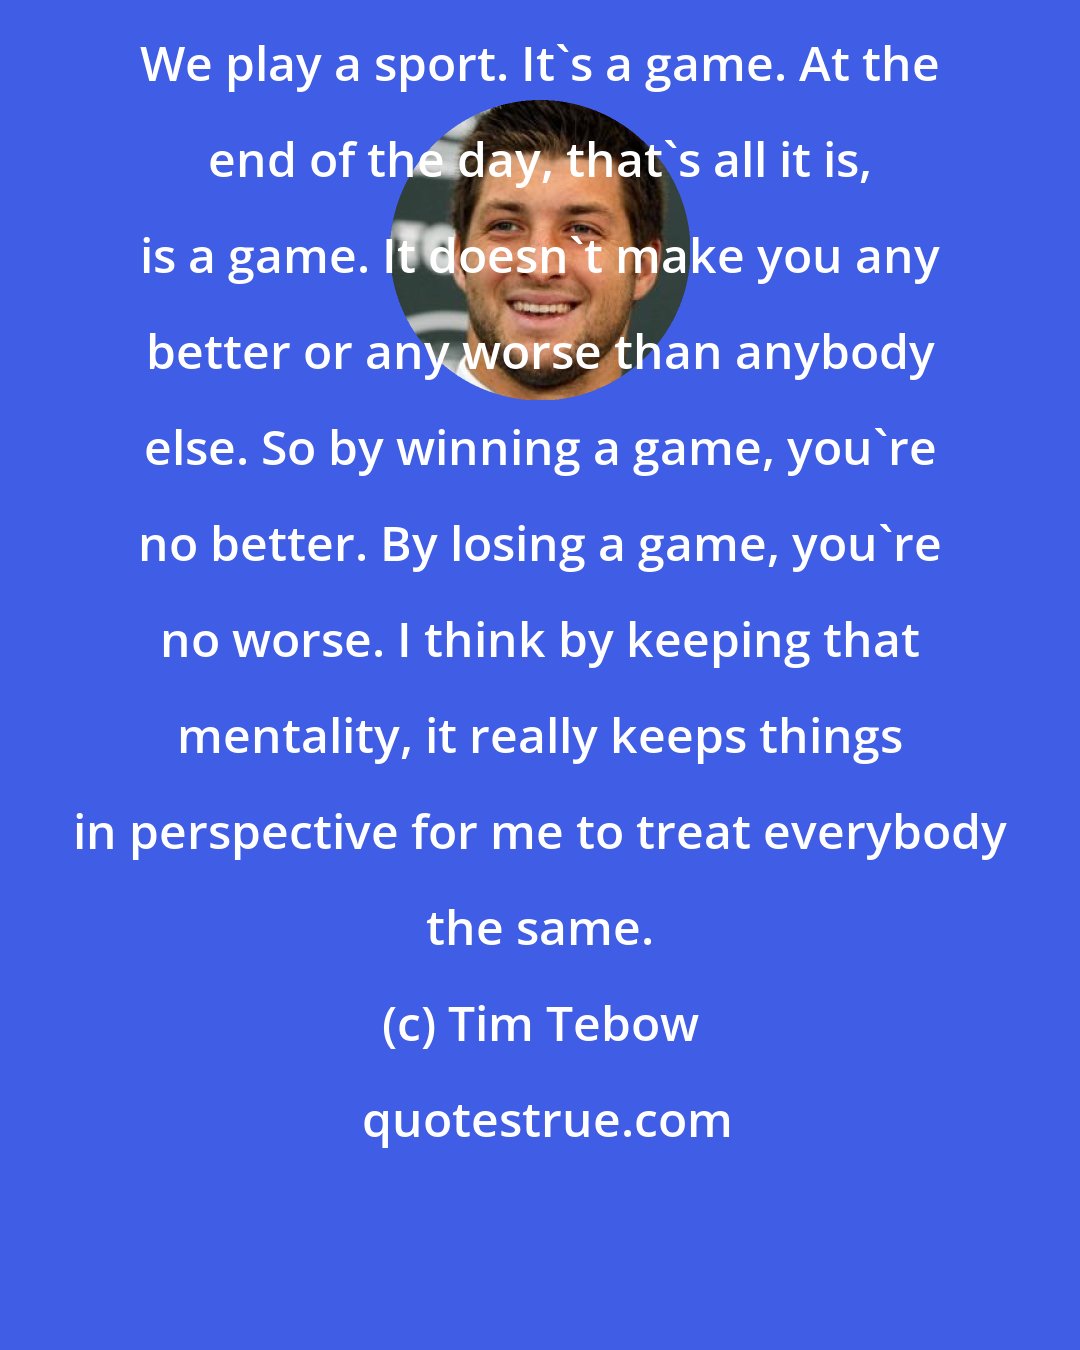 Tim Tebow: We play a sport. It's a game. At the end of the day, that's all it is, is a game. It doesn't make you any better or any worse than anybody else. So by winning a game, you're no better. By losing a game, you're no worse. I think by keeping that mentality, it really keeps things in perspective for me to treat everybody the same.